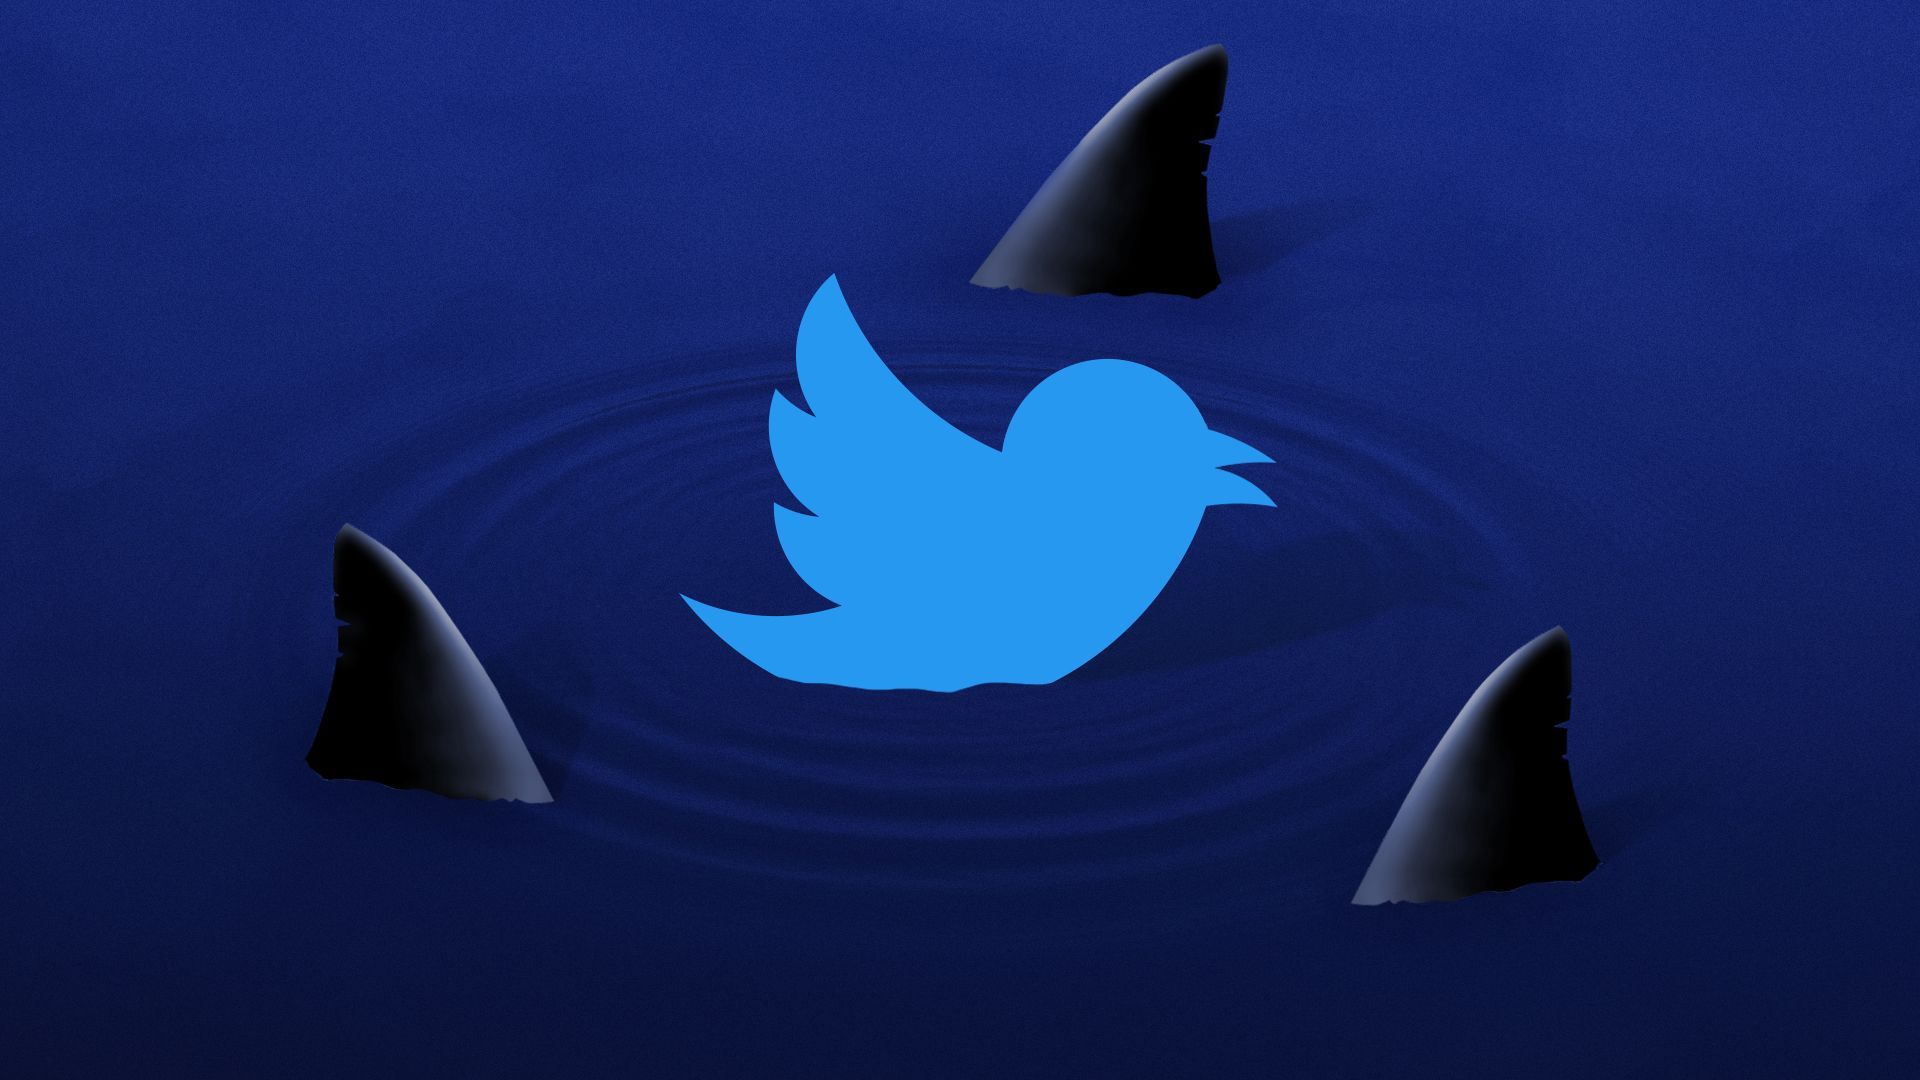 Illustration of the Twitter bird surrounded by shark fins.